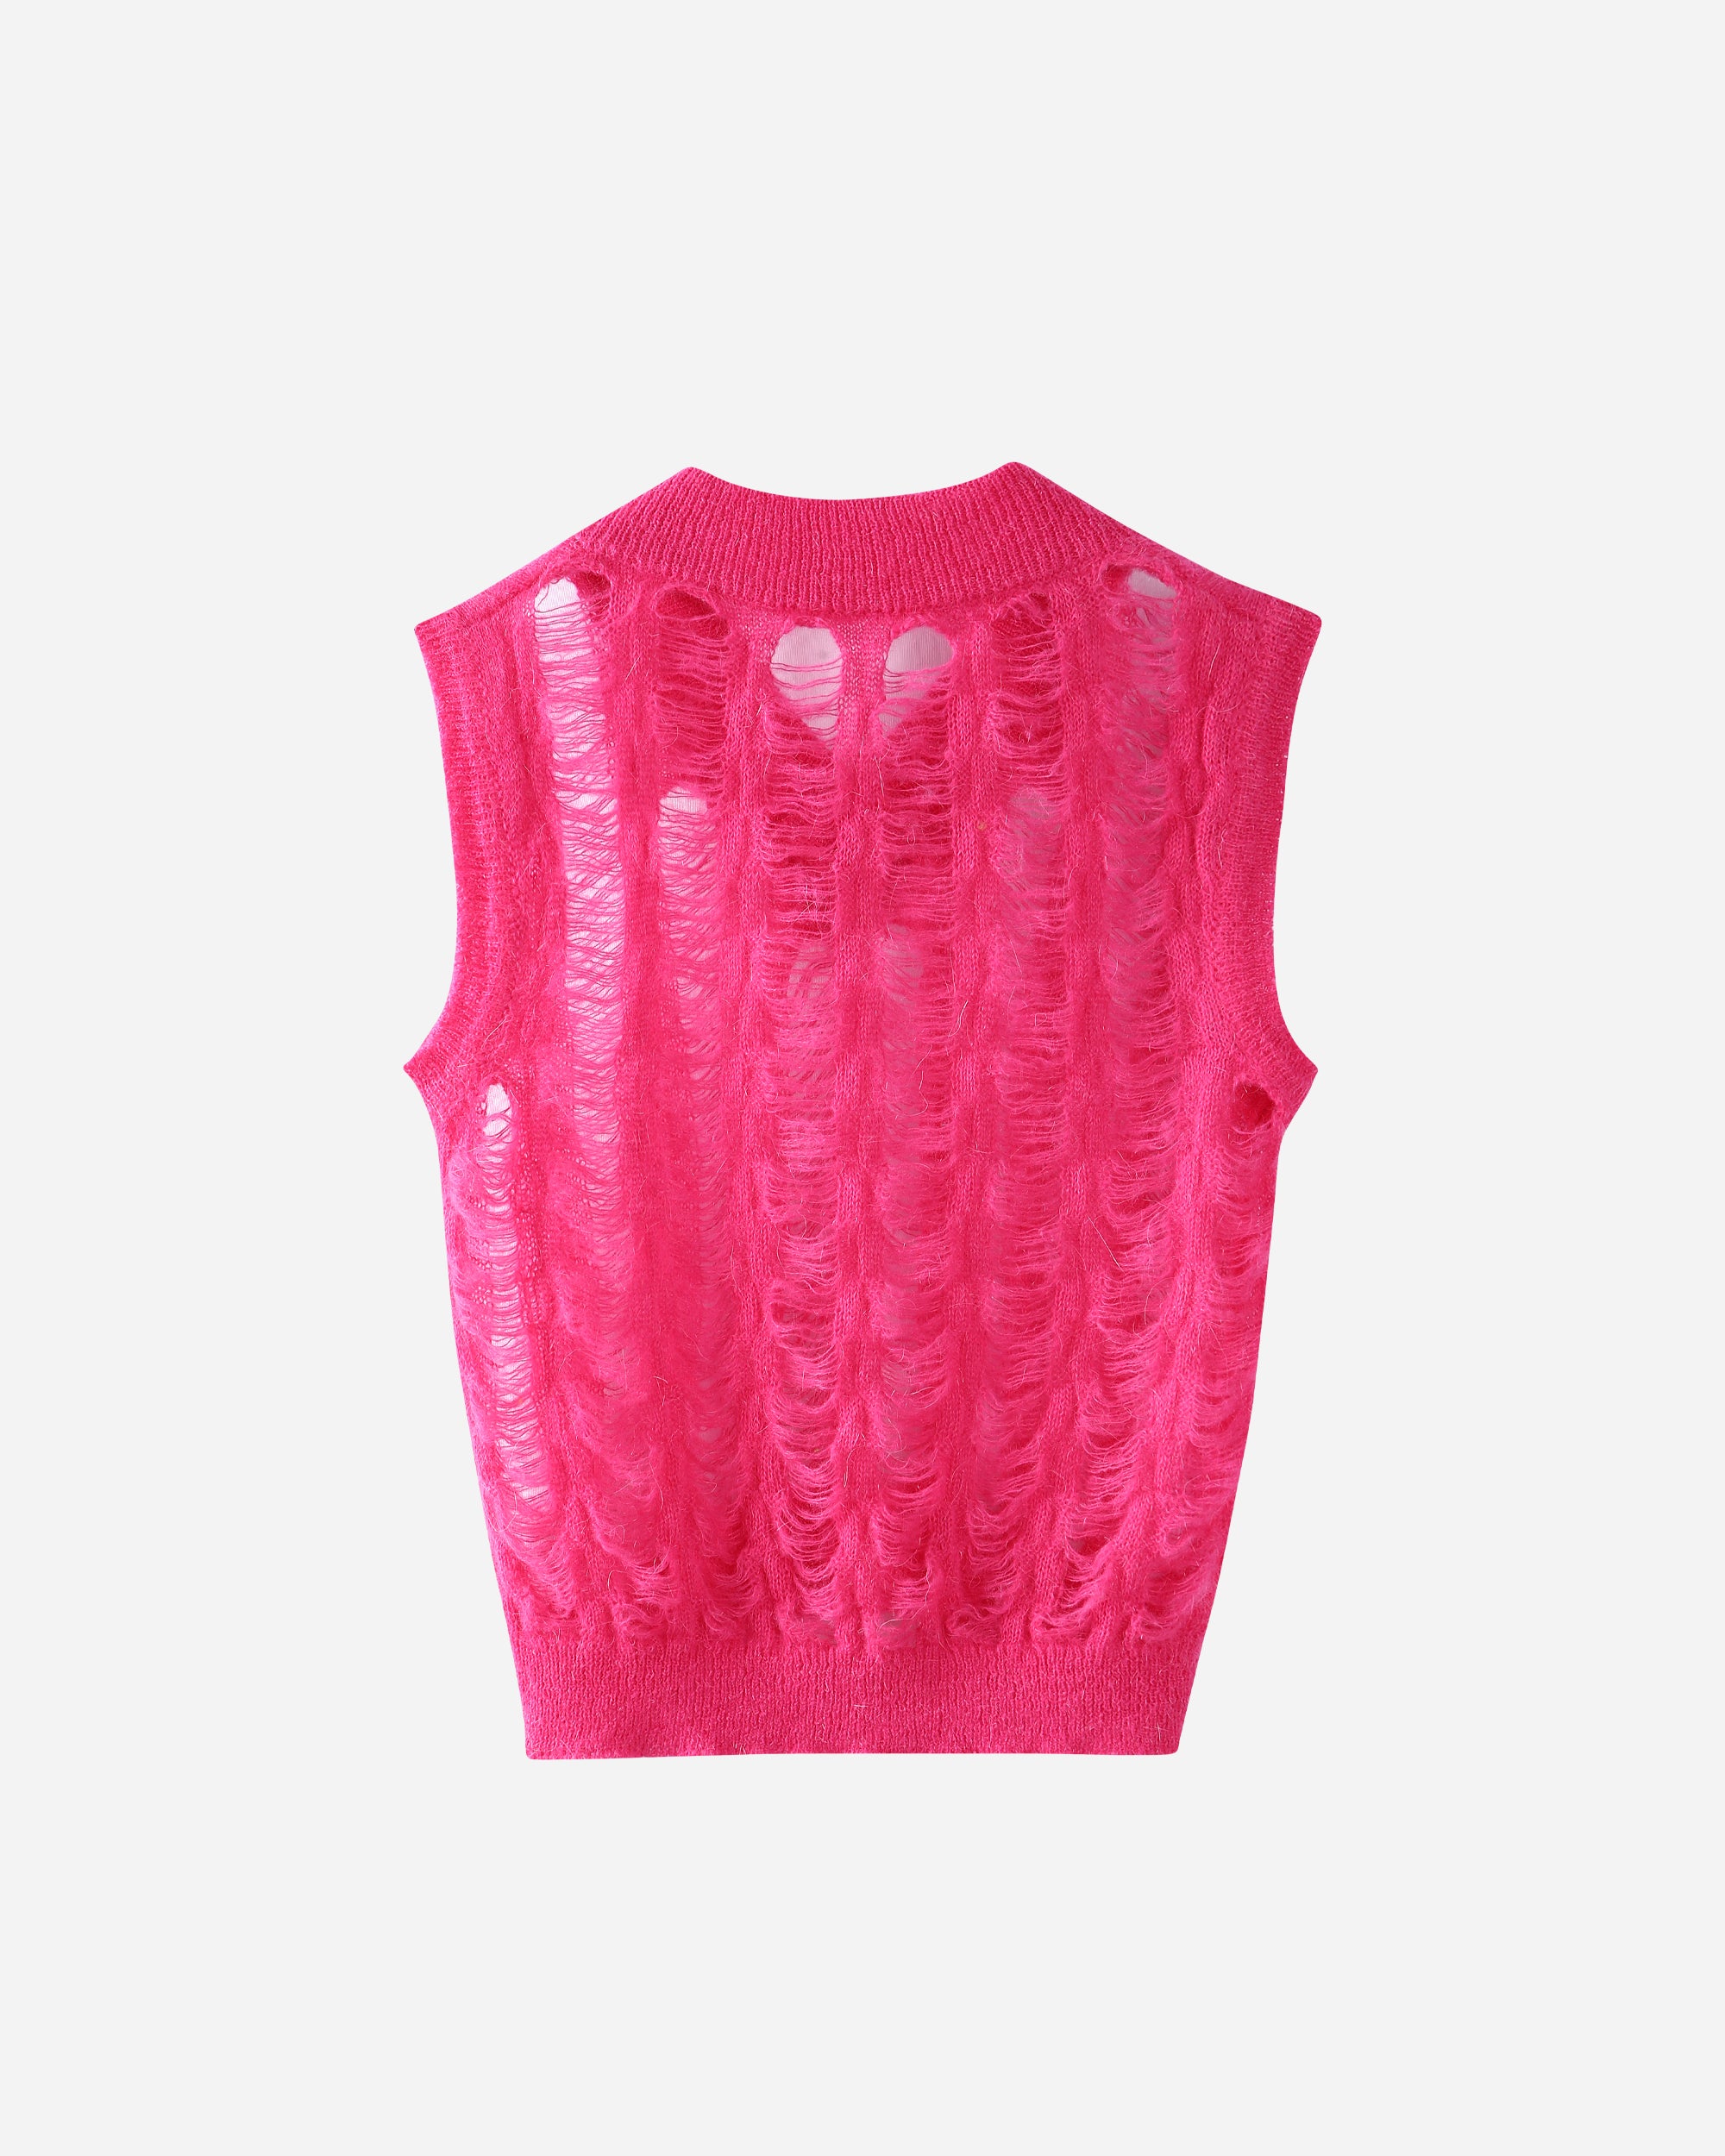 Andersson Bell Meadow Mohair Vest FUCHSIA PINK atb989w-FPNK